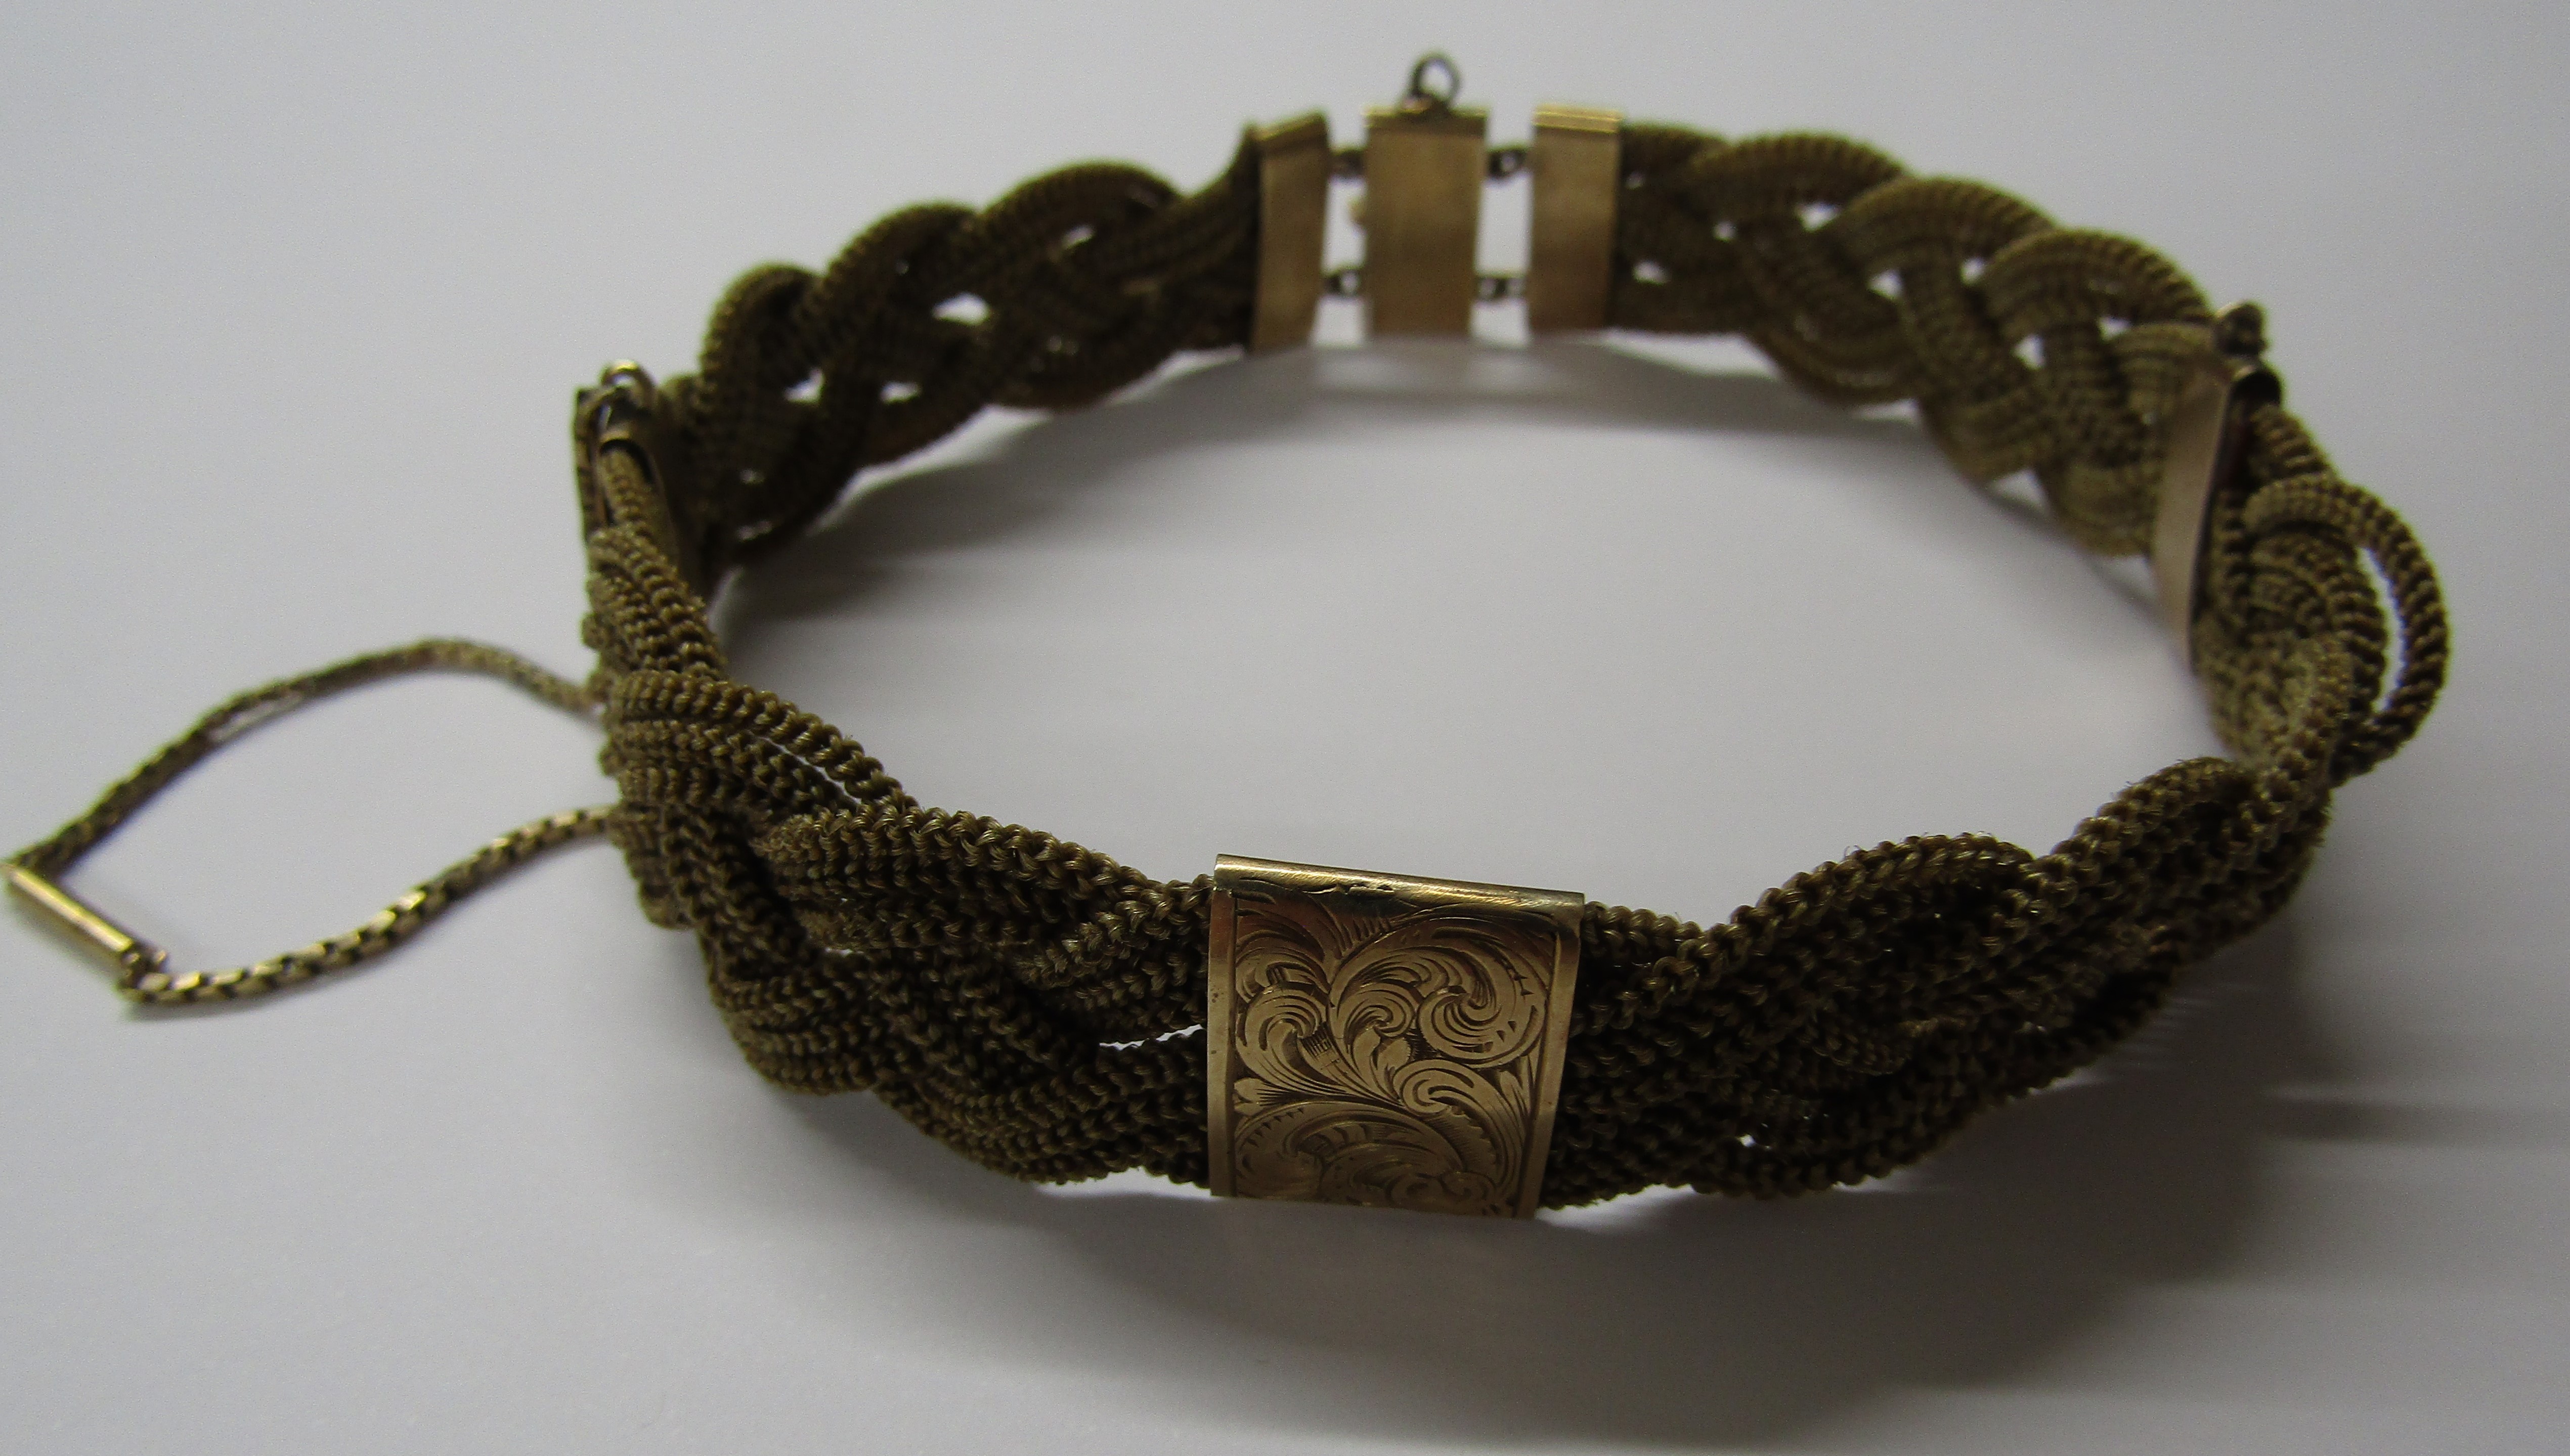 Plaited hair mourning bracelet with tested as 9ct gold mounts - Image 6 of 6